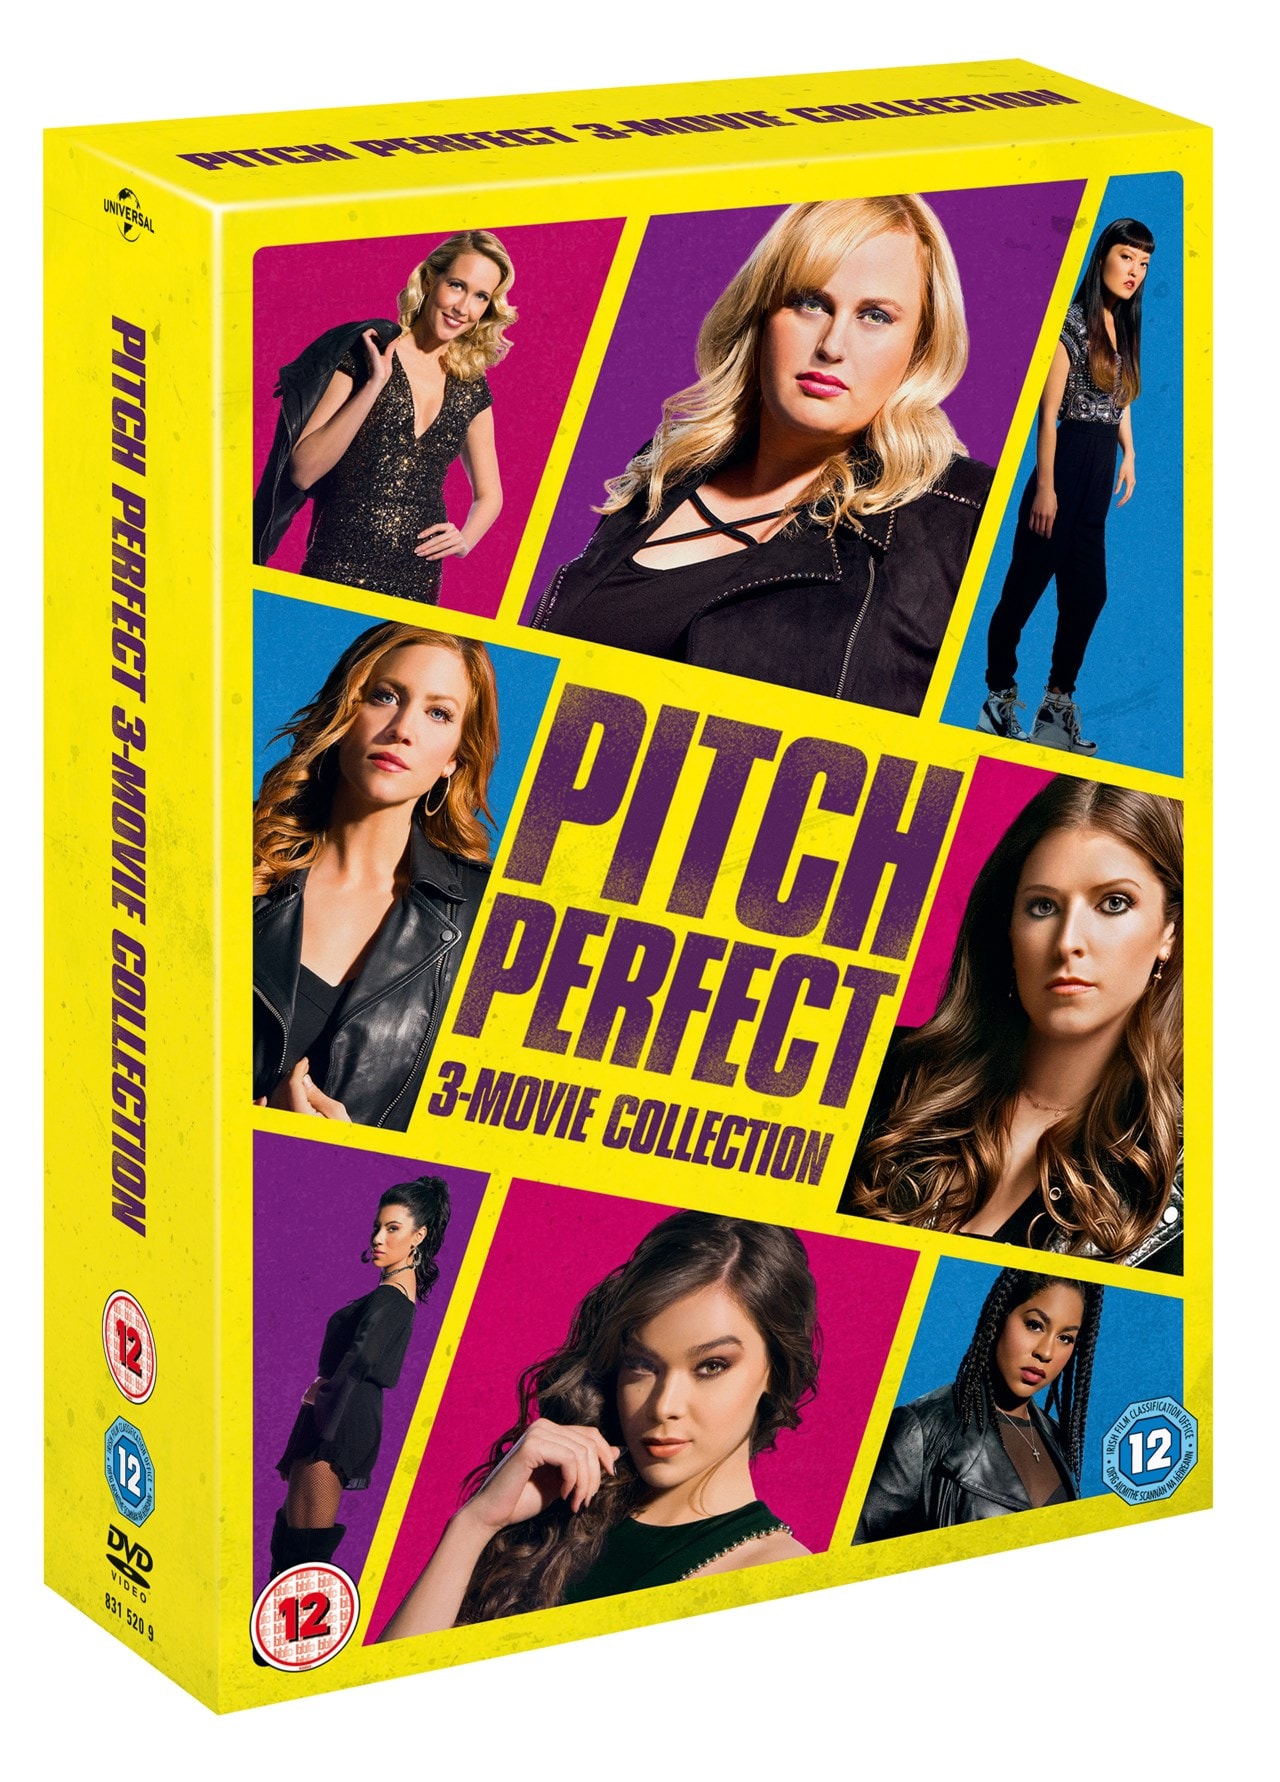 pitchperfect 123movies